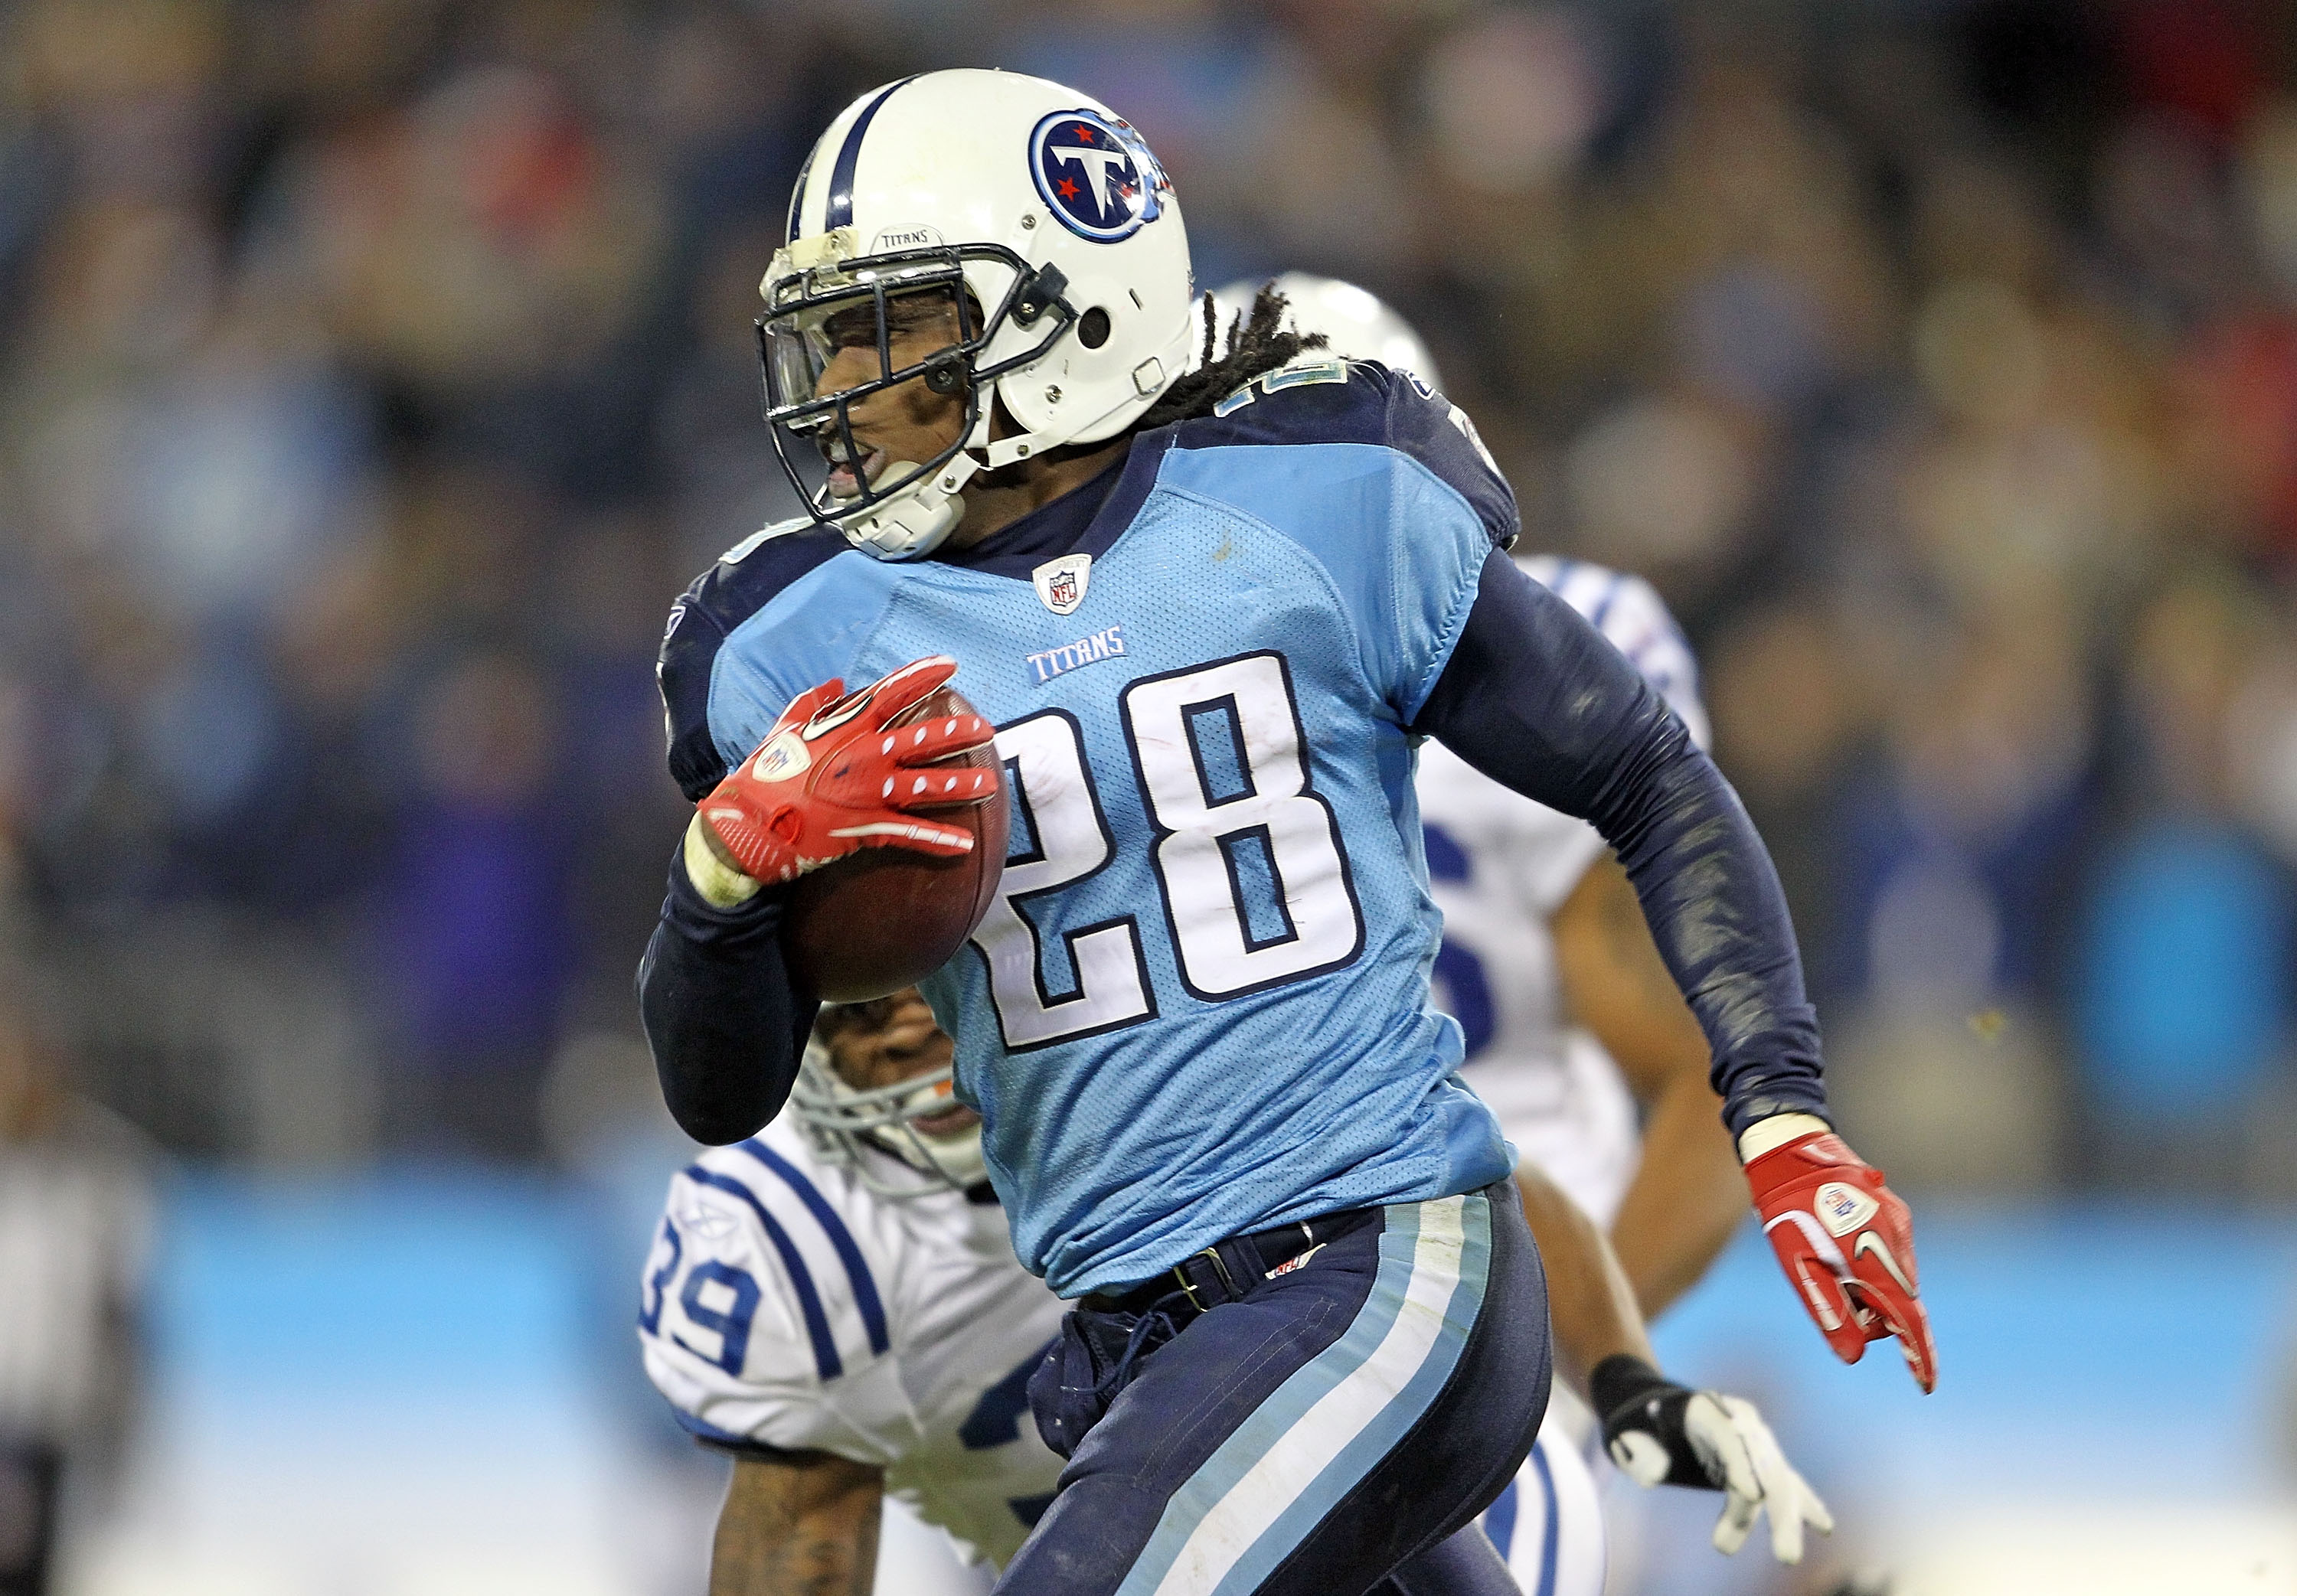 NASHVILLE, TN - DECEMBER 09:  Chris Johnson #28 of the Tennessee Titans runs with the ball against the Indianapolis Colts during the NFL game at LP Field on December 9, 2010 in Nashville, Tennessee.  (Photo by Andy Lyons/Getty Images)